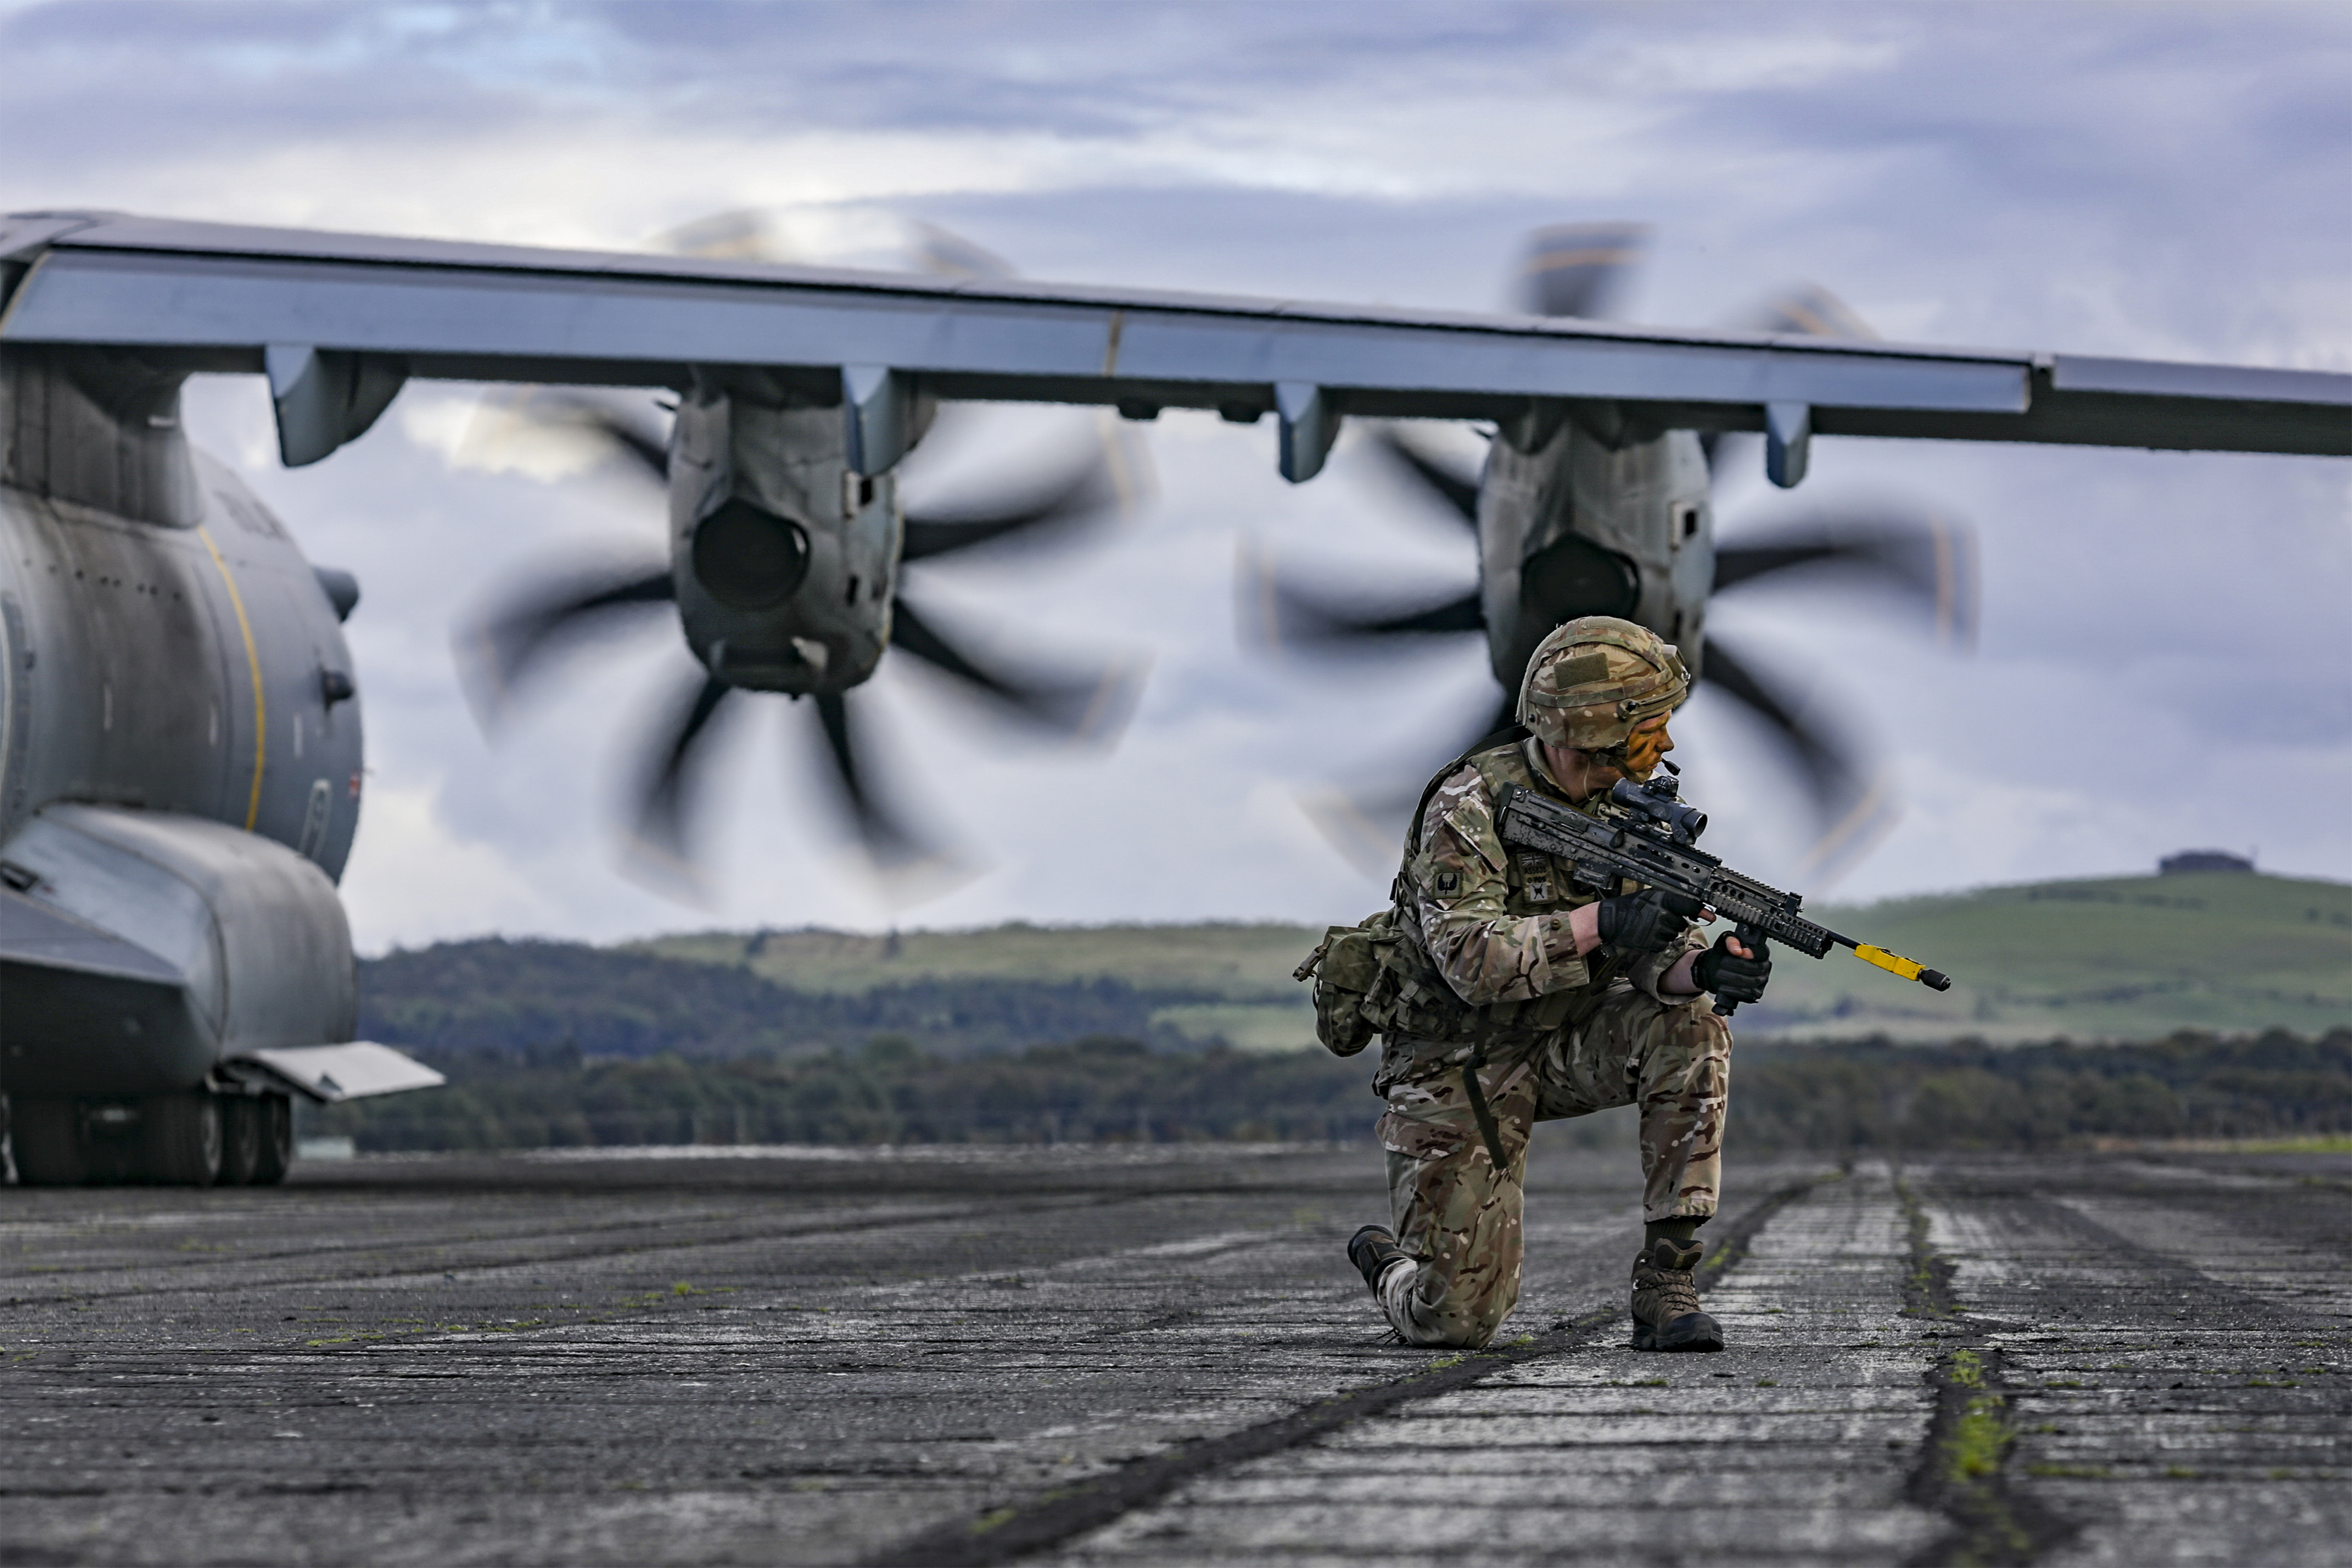 Atlas propellers, with RAF Regiment soldier kneeling with his rifle.